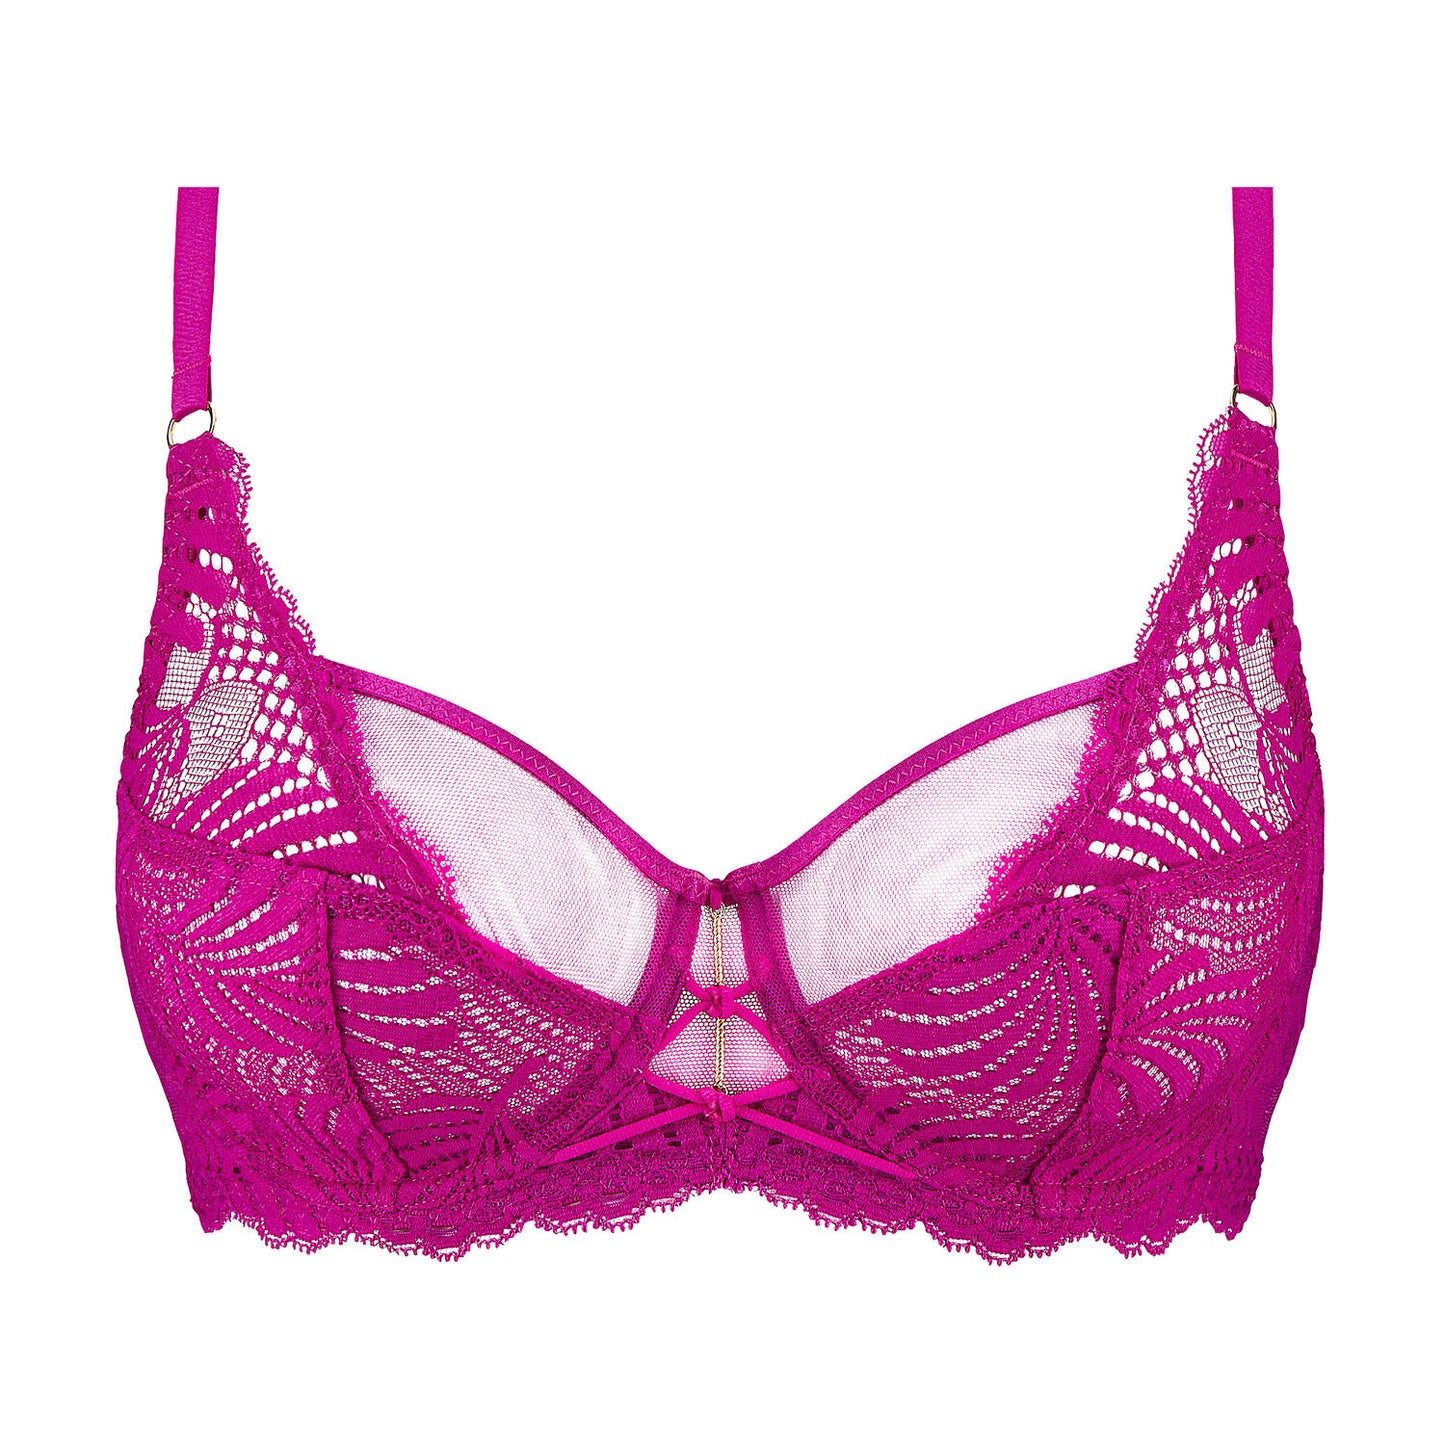 Rythym Of Desire in Radiant Pink Full Cup Bra By Aubade - 30H, 34H + 36H